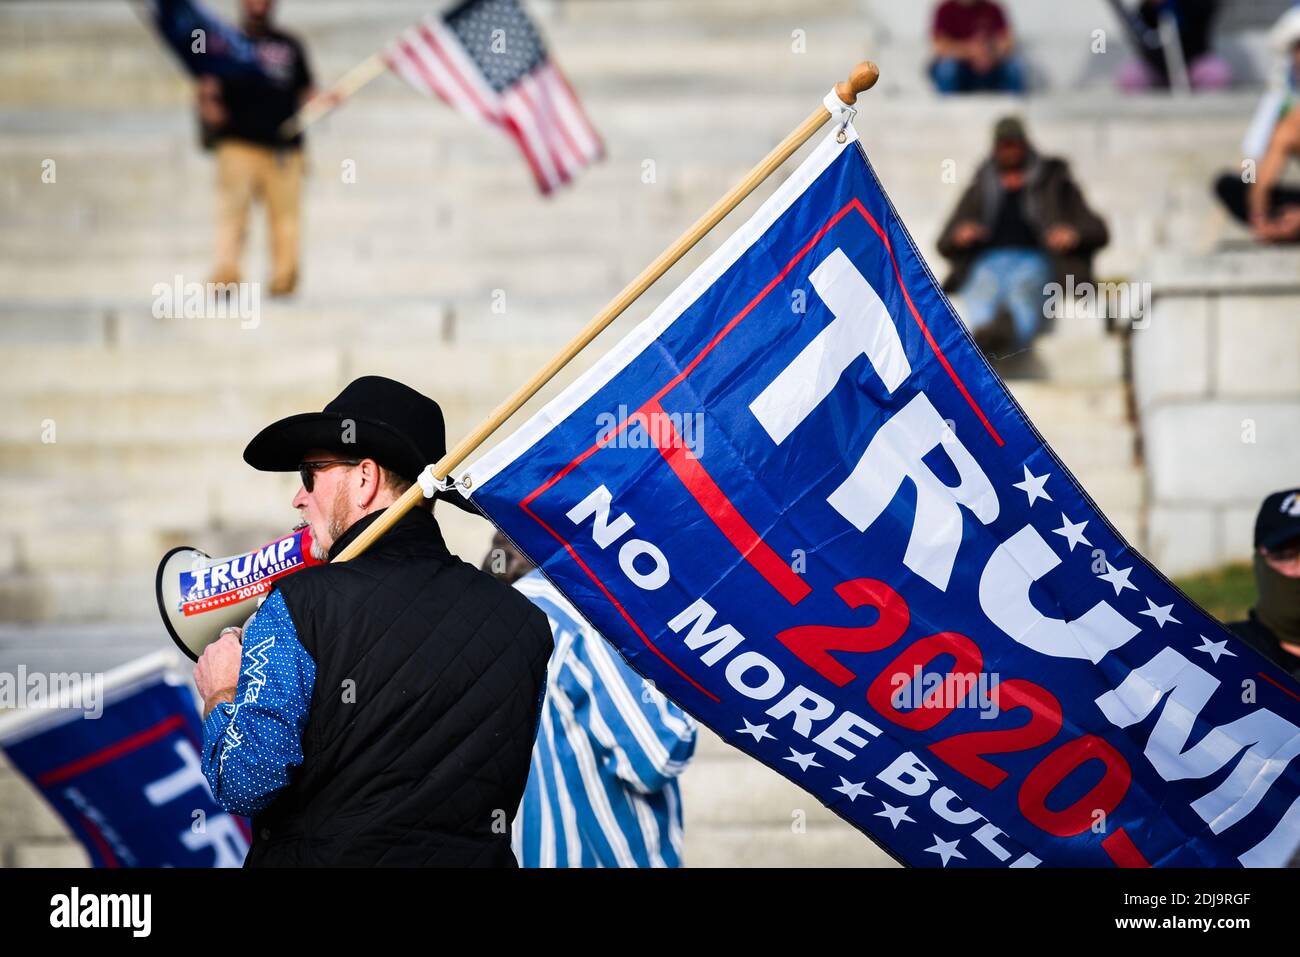 Pro-Trump demonstrators AFTER THE US 2020 PRESIDENTIAL ELECTION in front of the Vermont State House, Montpelier, VT, USA. Stock Photo